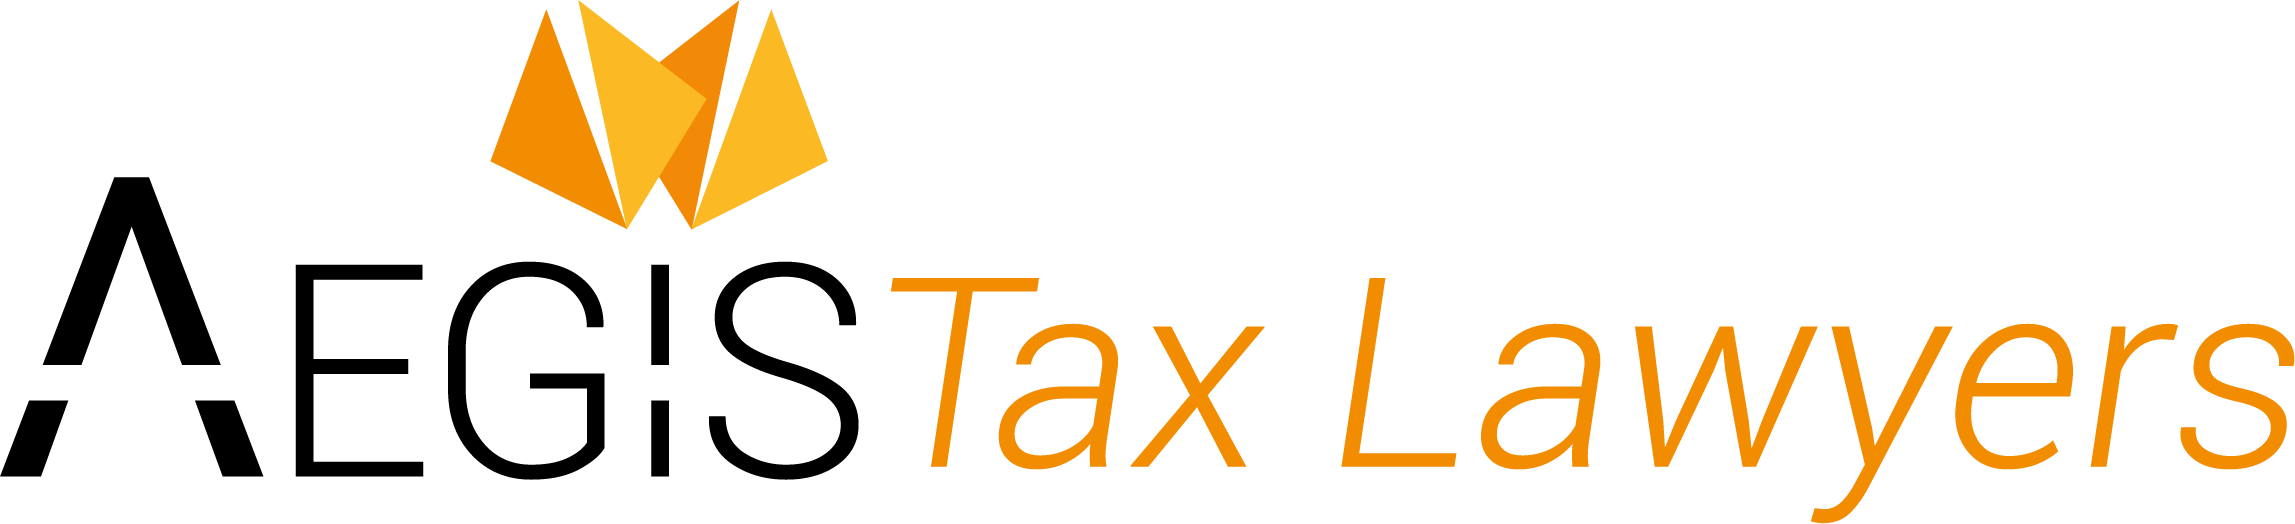 Aegis Tax Lawyers -lang.png